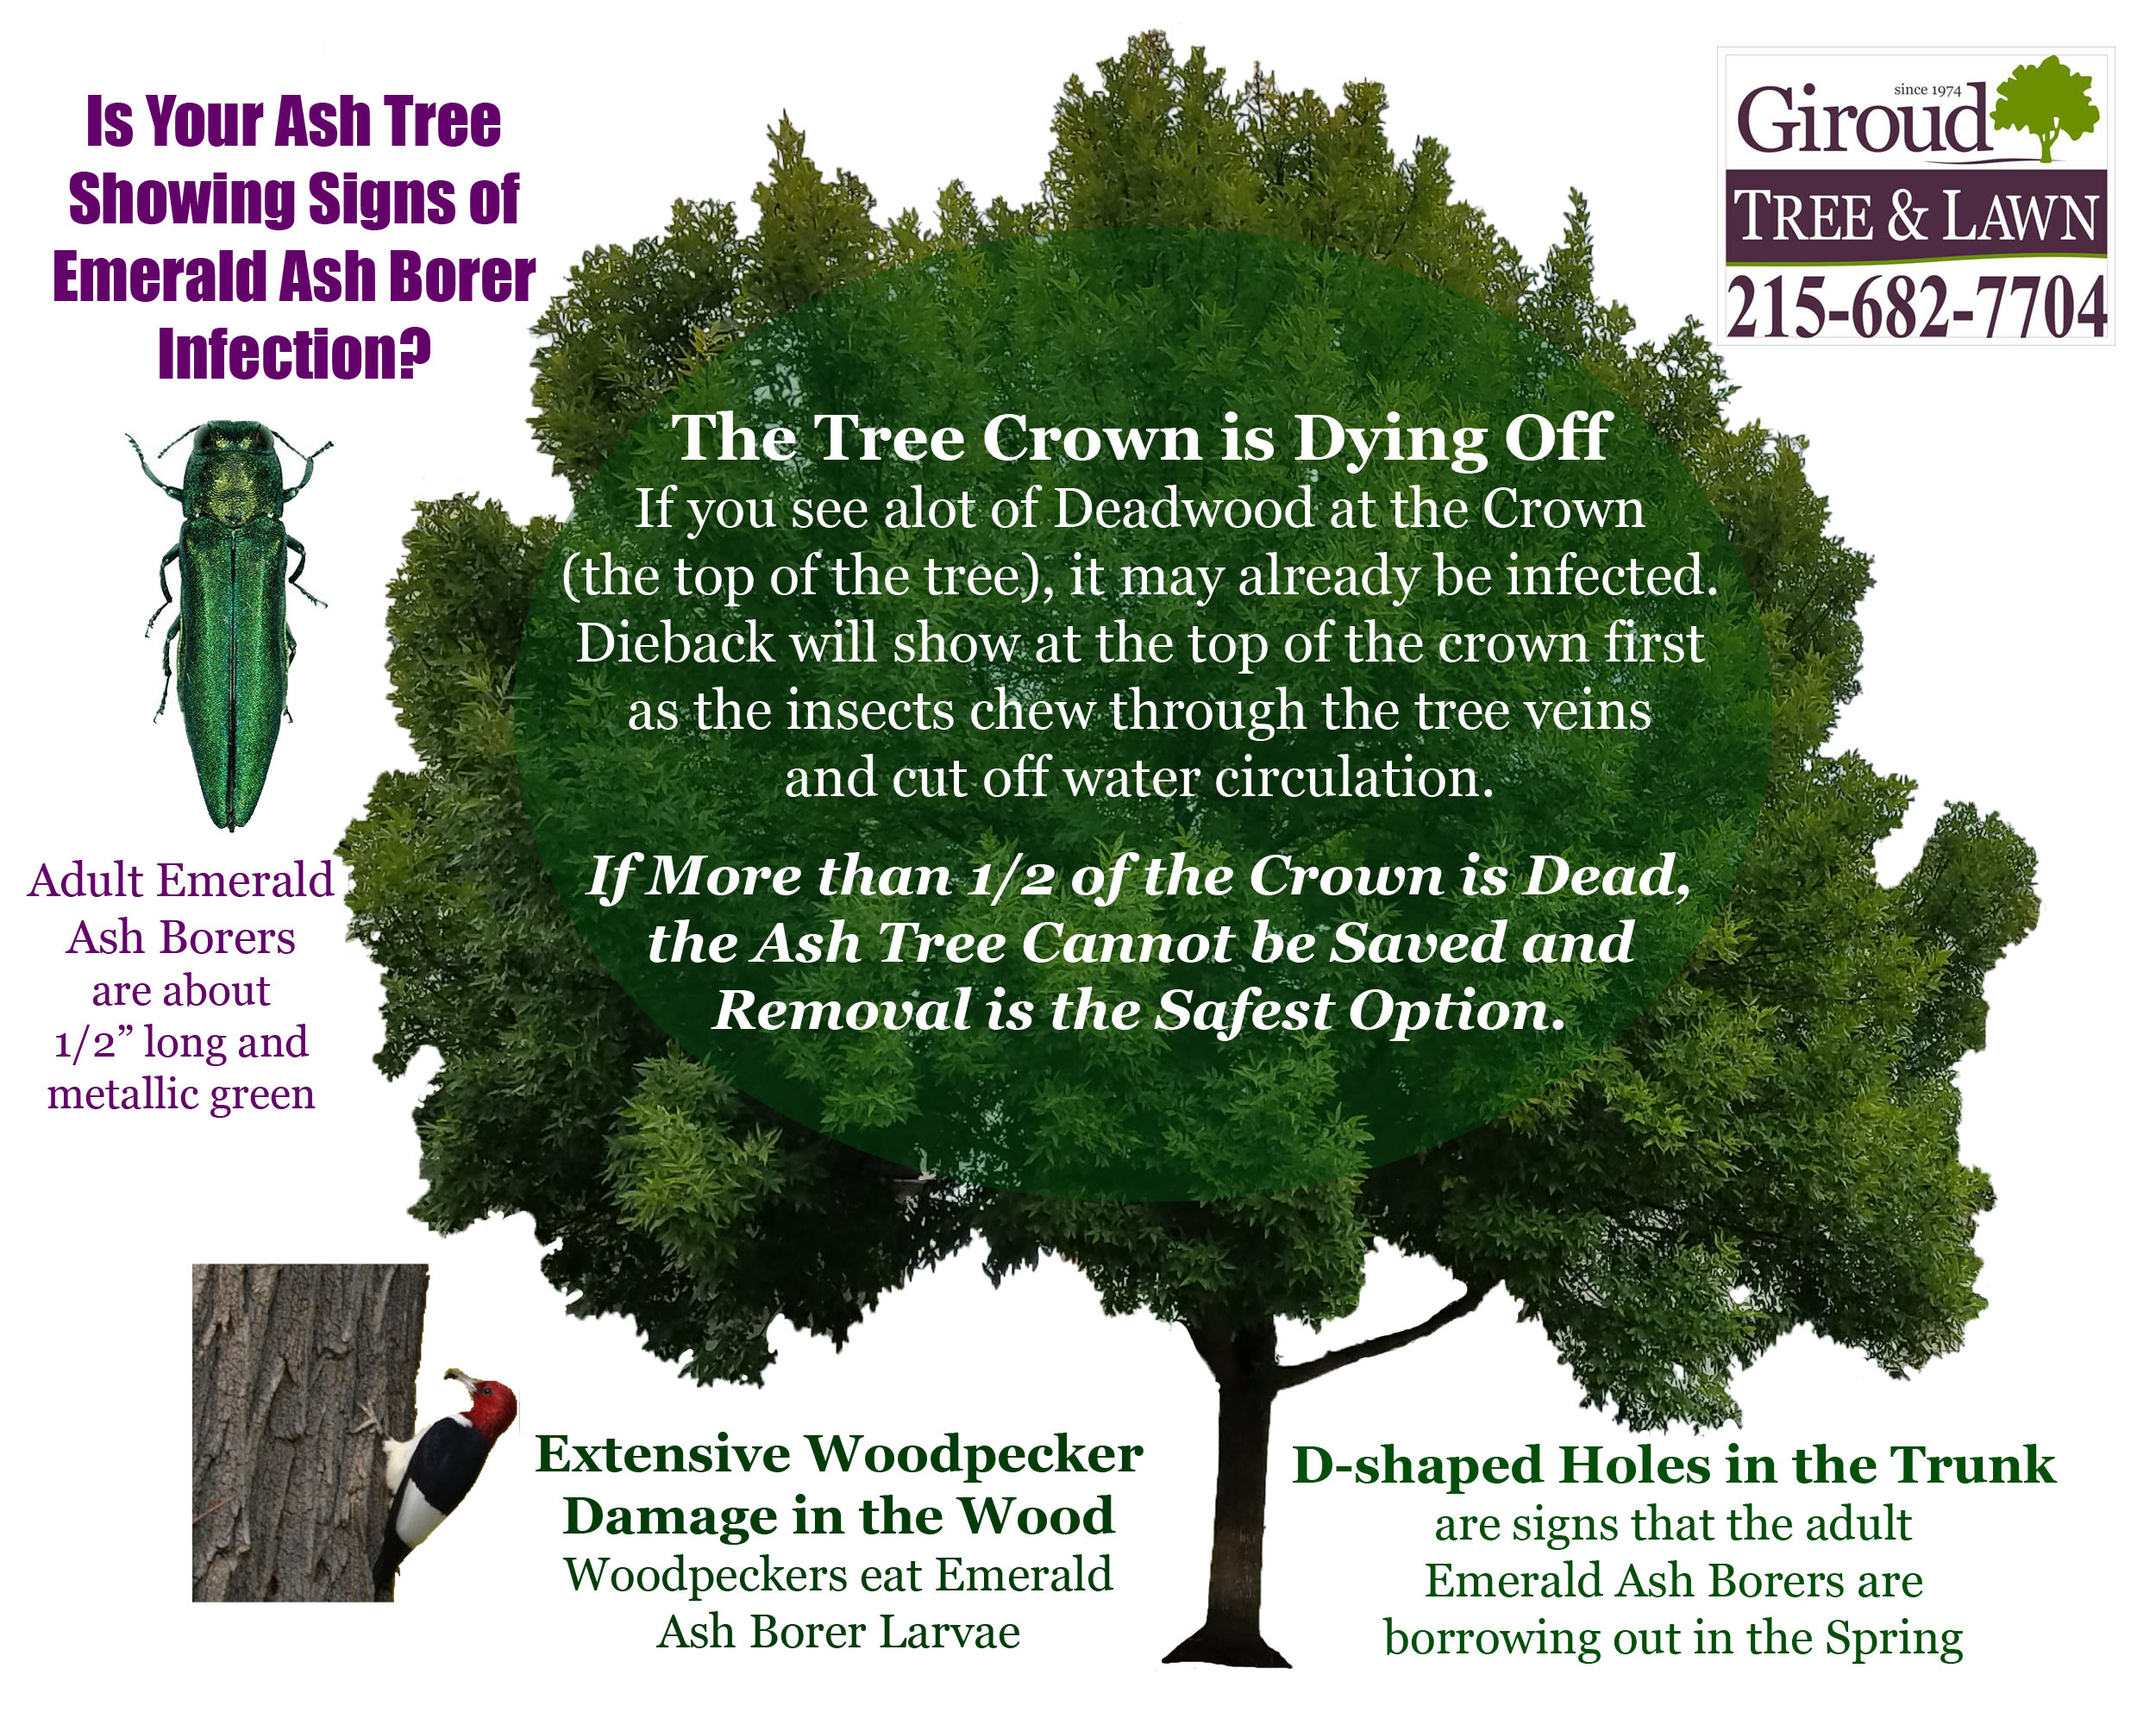 How to know if your Ash tree is infected with Emerald Ash Borers